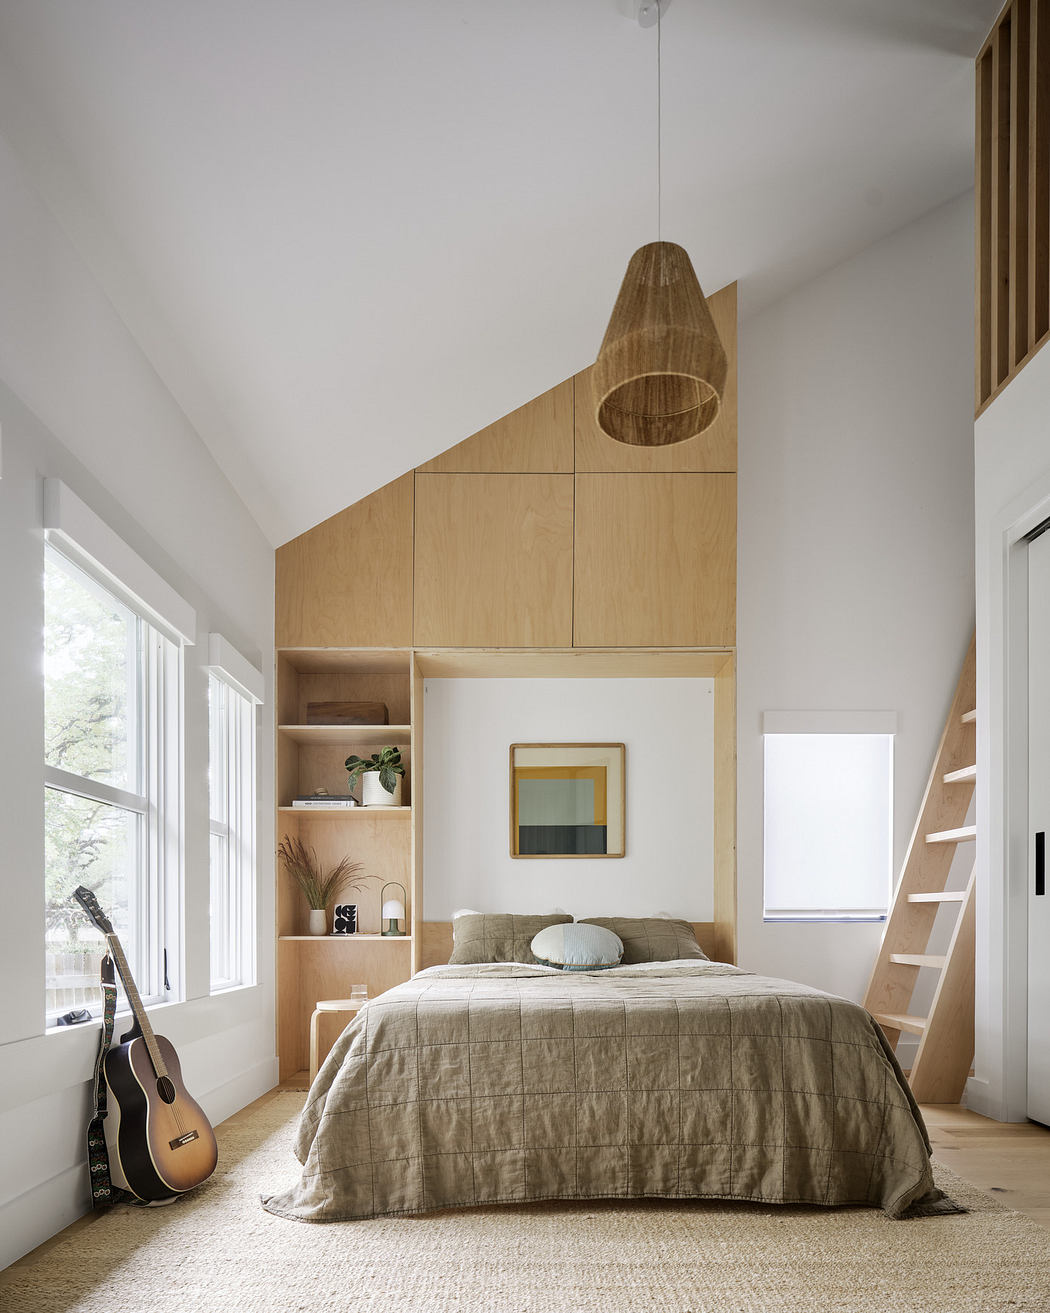 Minimalist bedroom with wooden built-ins, a neutral palette, and a guitar.